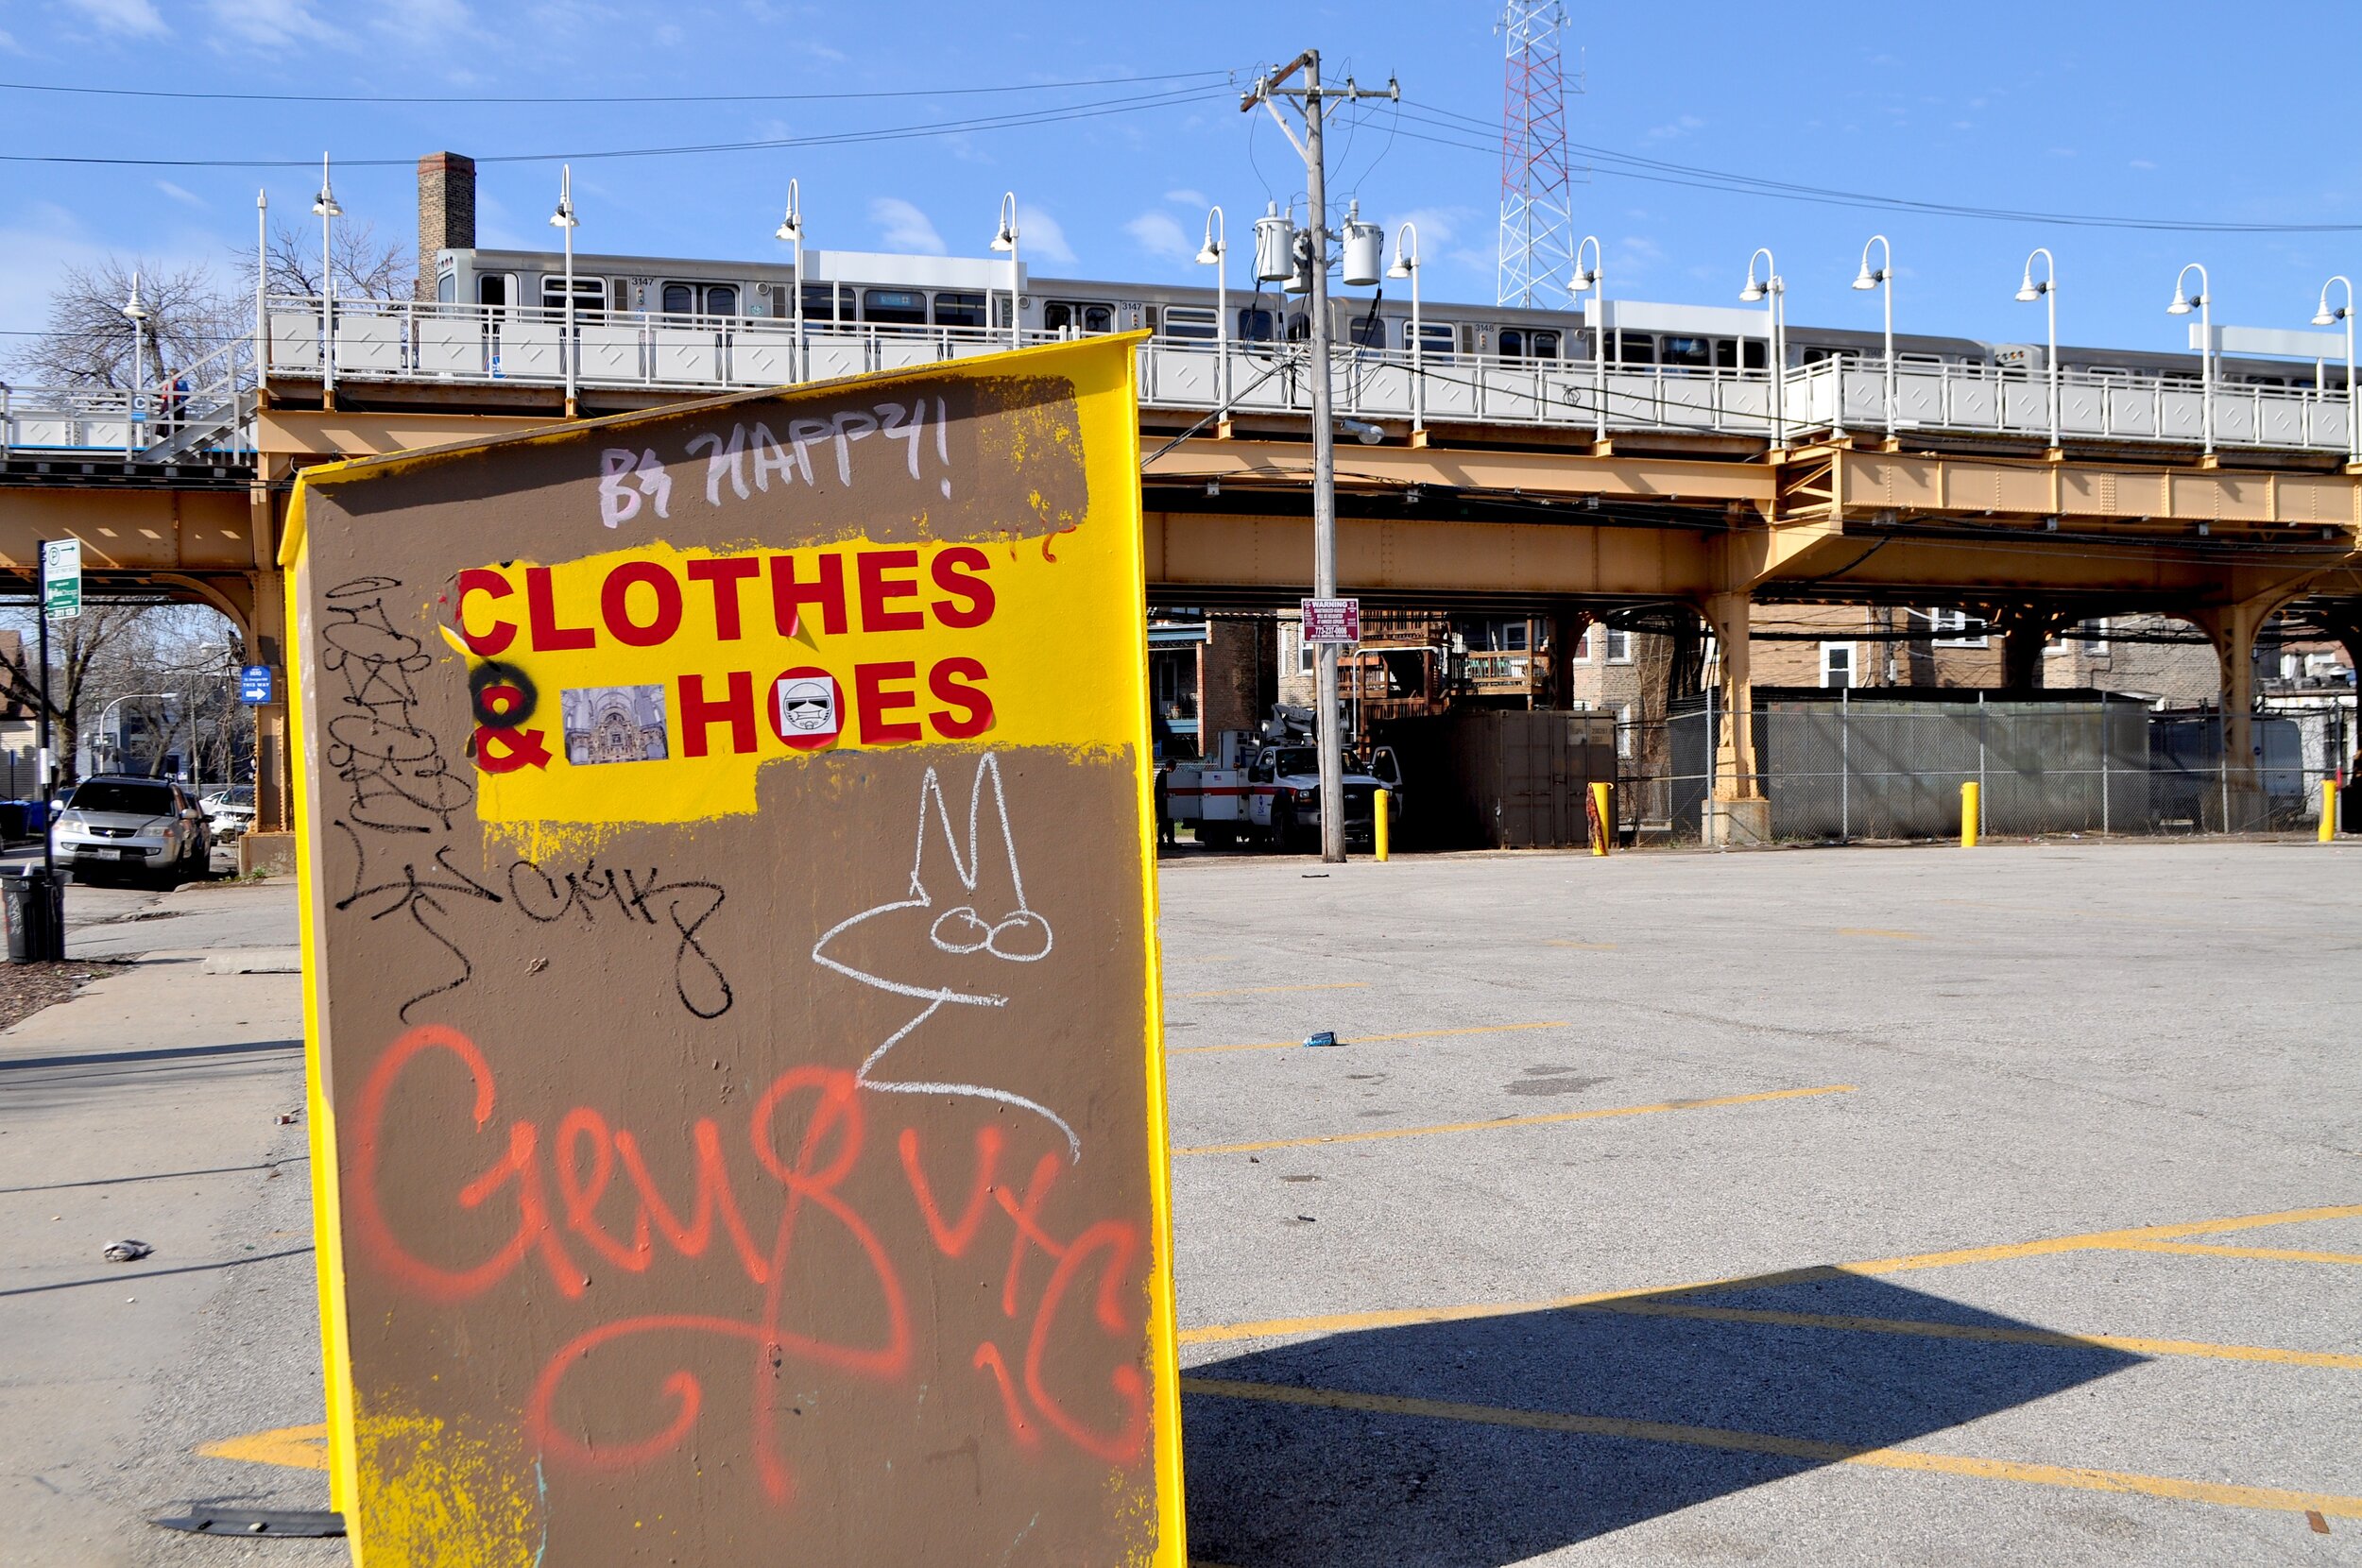 Clothes &amp; Hoes - Chicago, Illinois (2019)